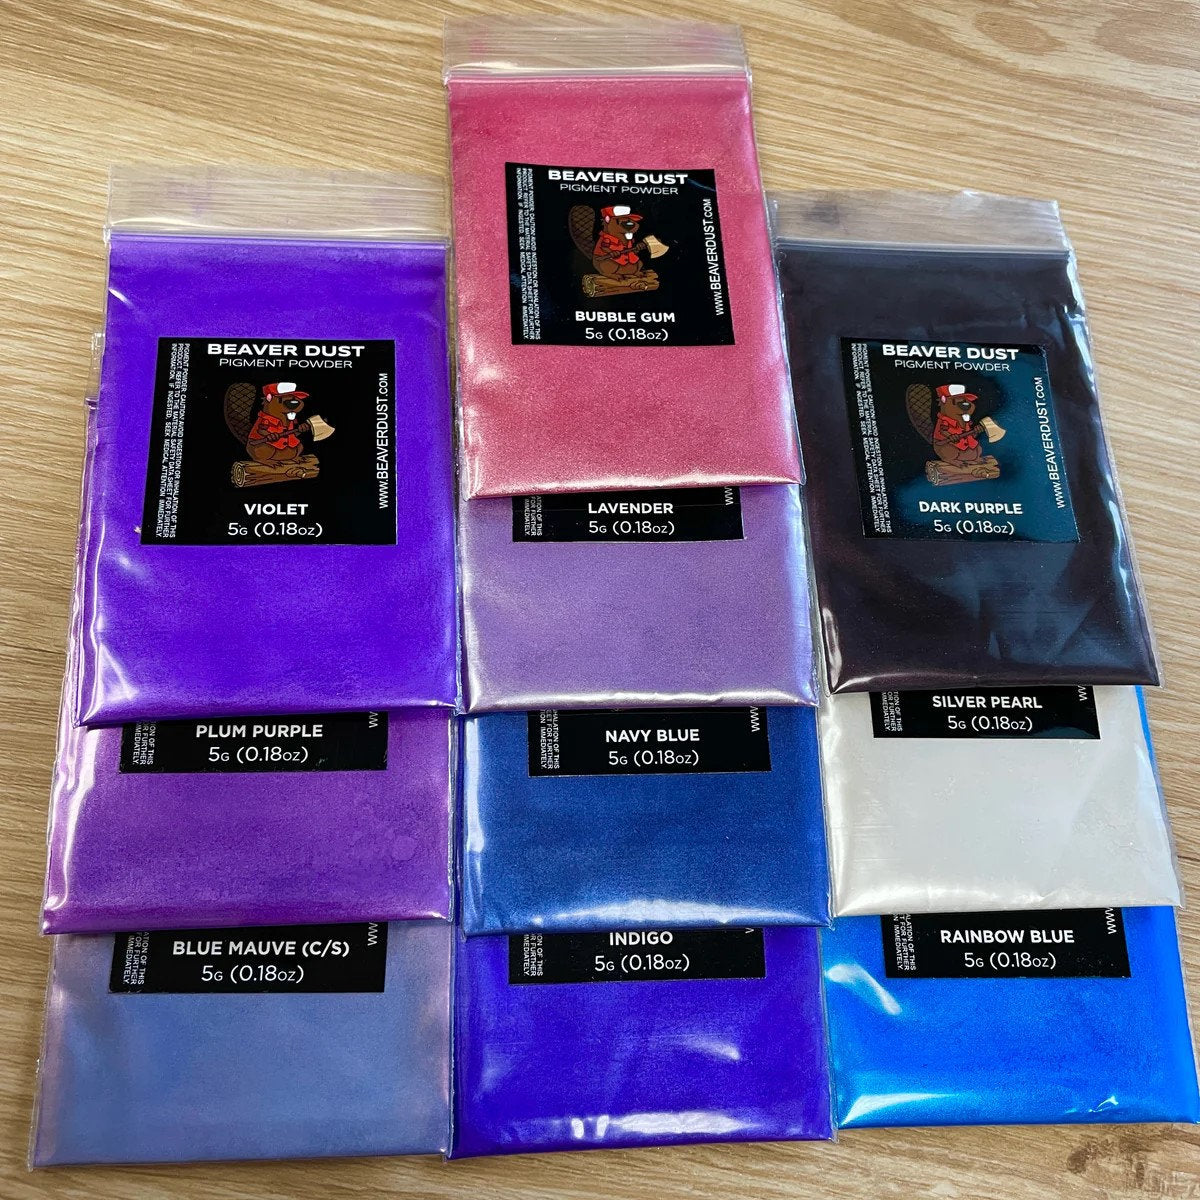 Mica Powder - Variety Pack 8 (Cool Purple/Blue) - Mica Powder For Epoxy Resin, Candle & Soap Making, Make Up, Art and Much More. - TMResinsupplies